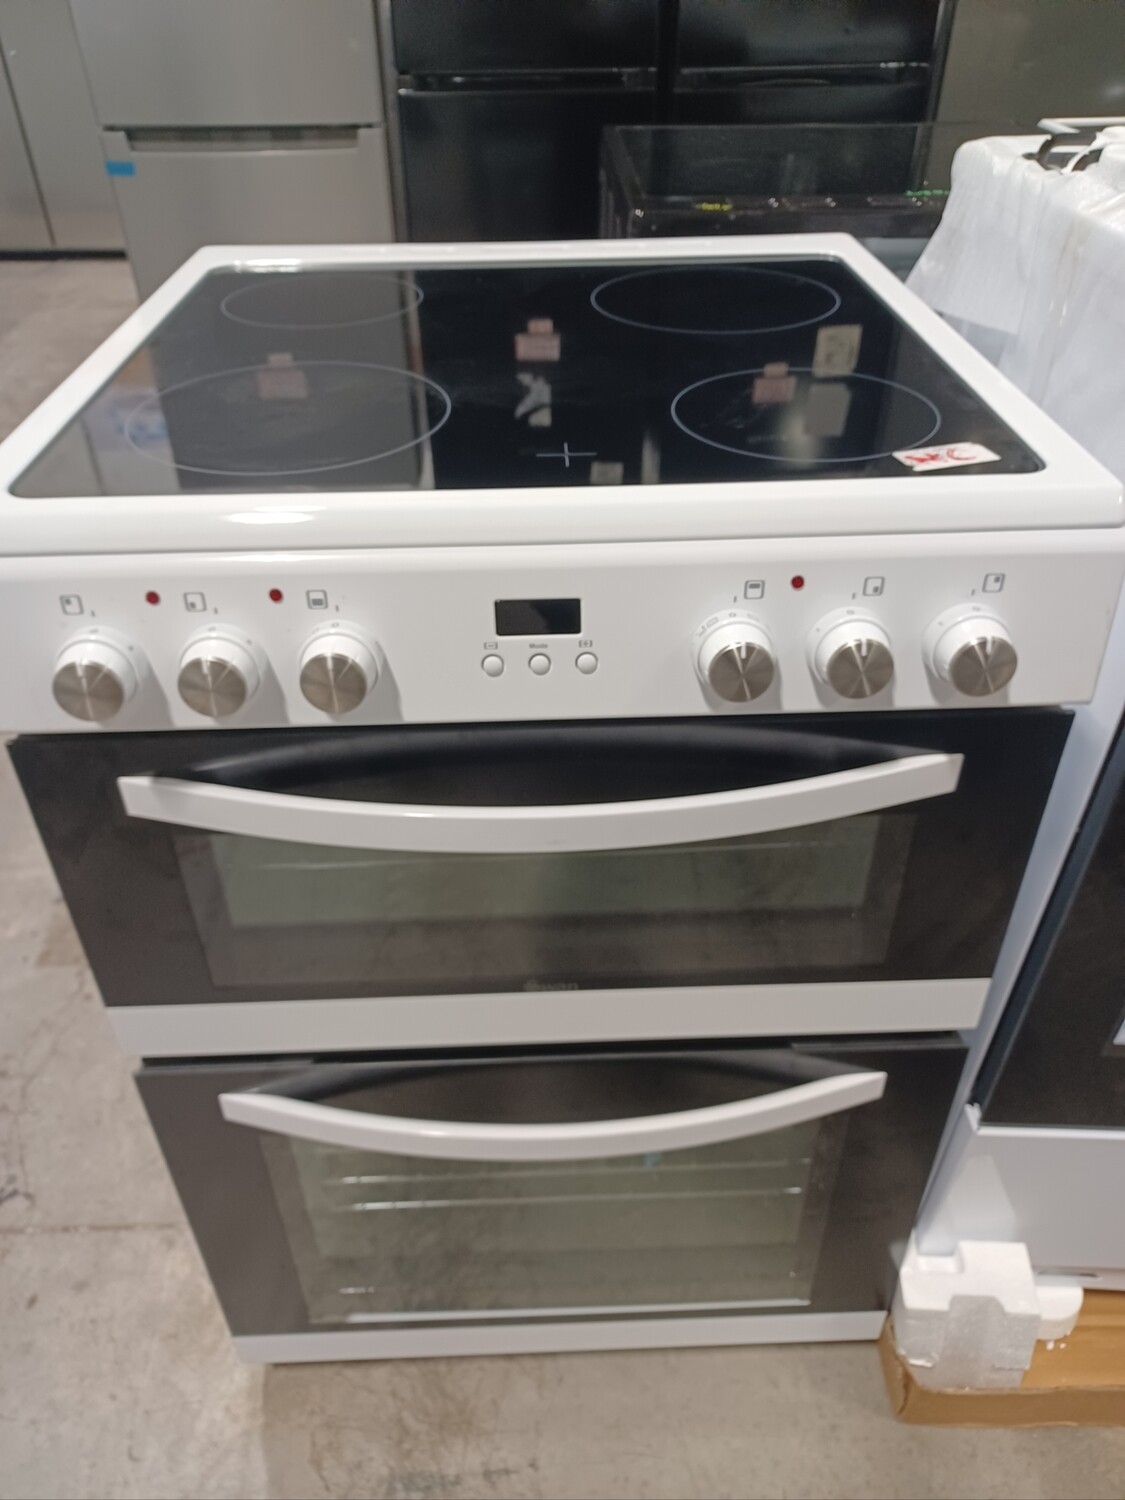 Swan SX158160W 60cm Electric Cooker with Ceramic Hob - White - New Graded 12 Month Guarantee 